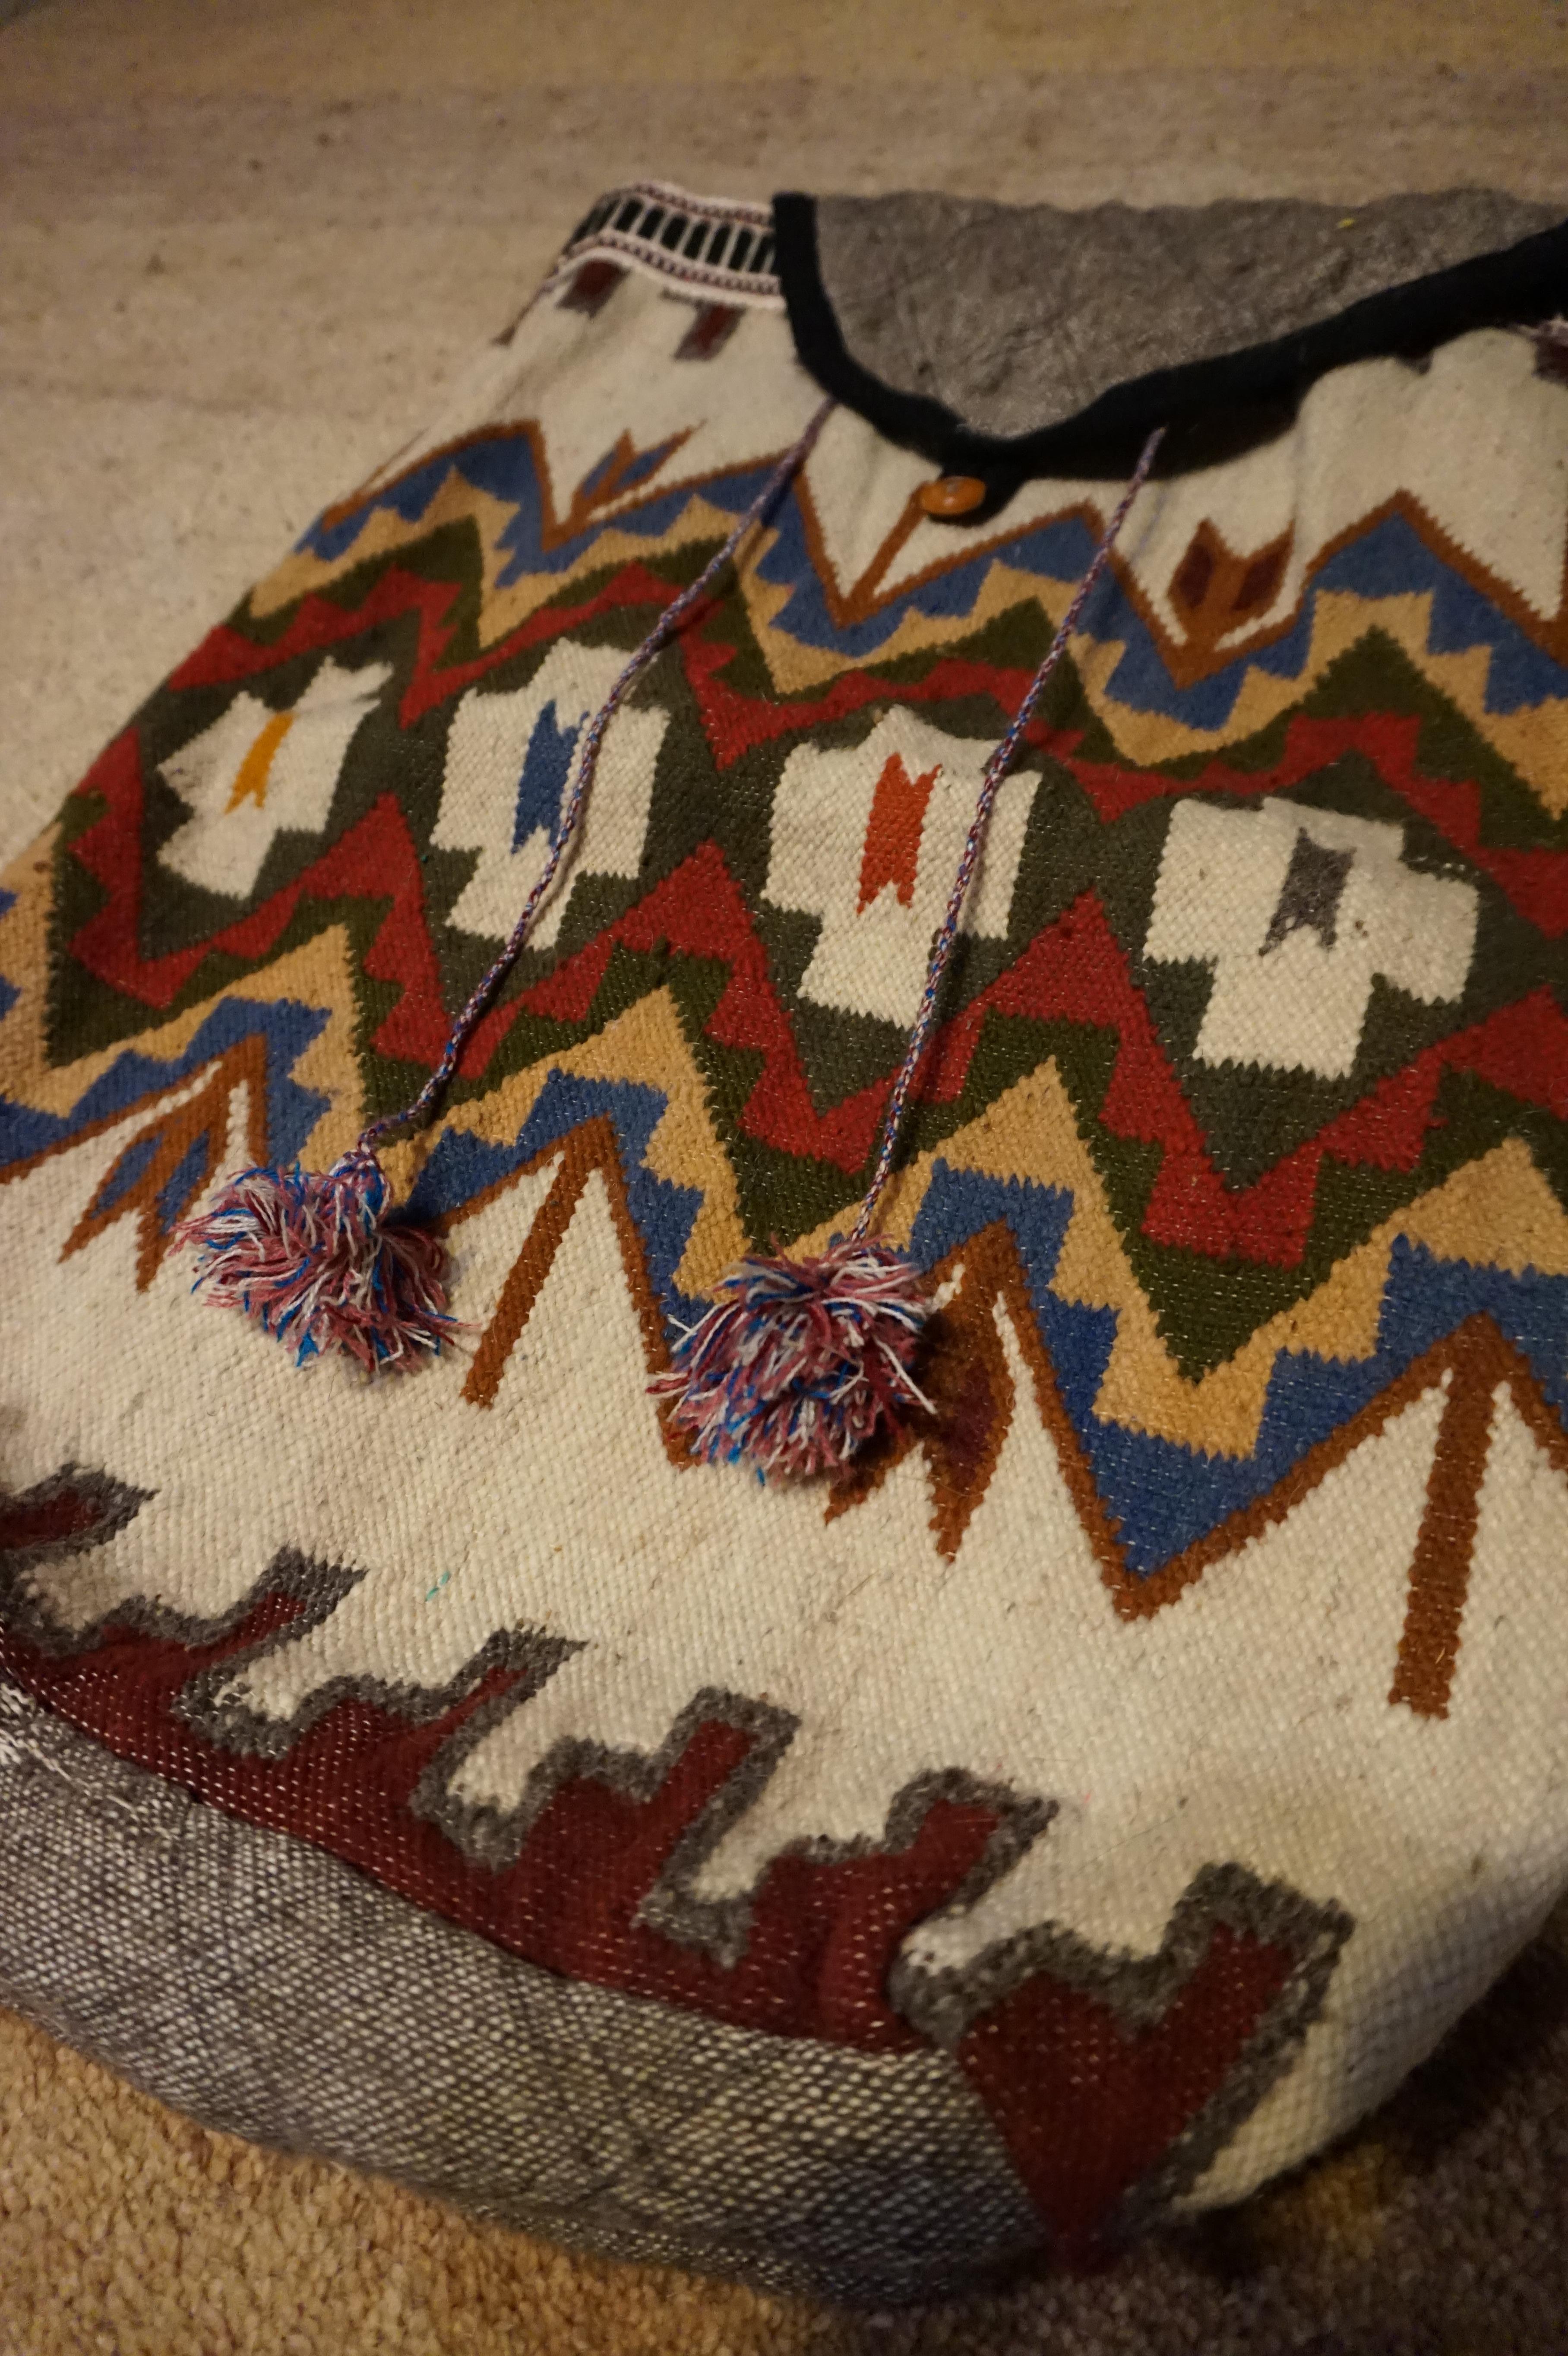 Turkish hand knotted tribal knapsack cum baby carrier. Large size. Rare and in good condition with colors still vibrant,

circa 1940s.